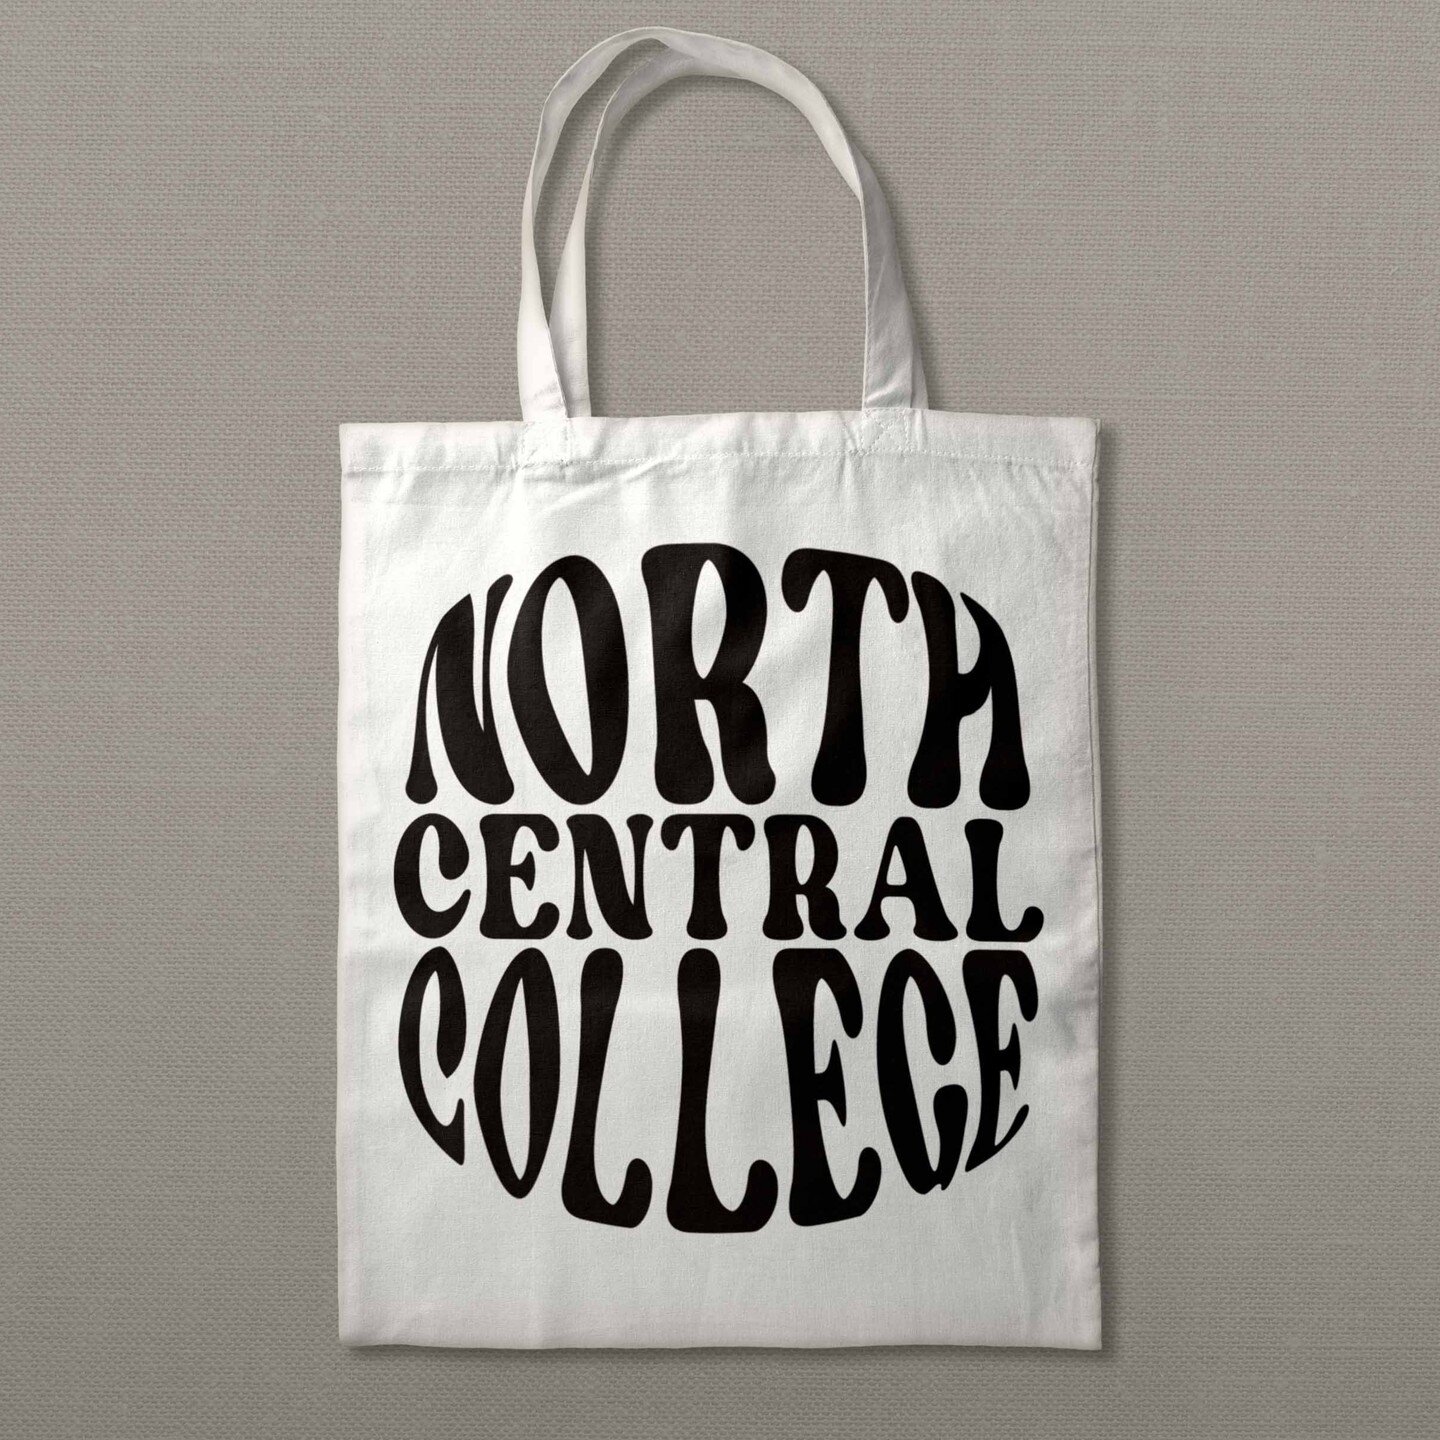 This was one of the tote bag design winners made by Melissa Benton! 
.
#graphicdesign #northcentralcollege #ncc #designagencyncc